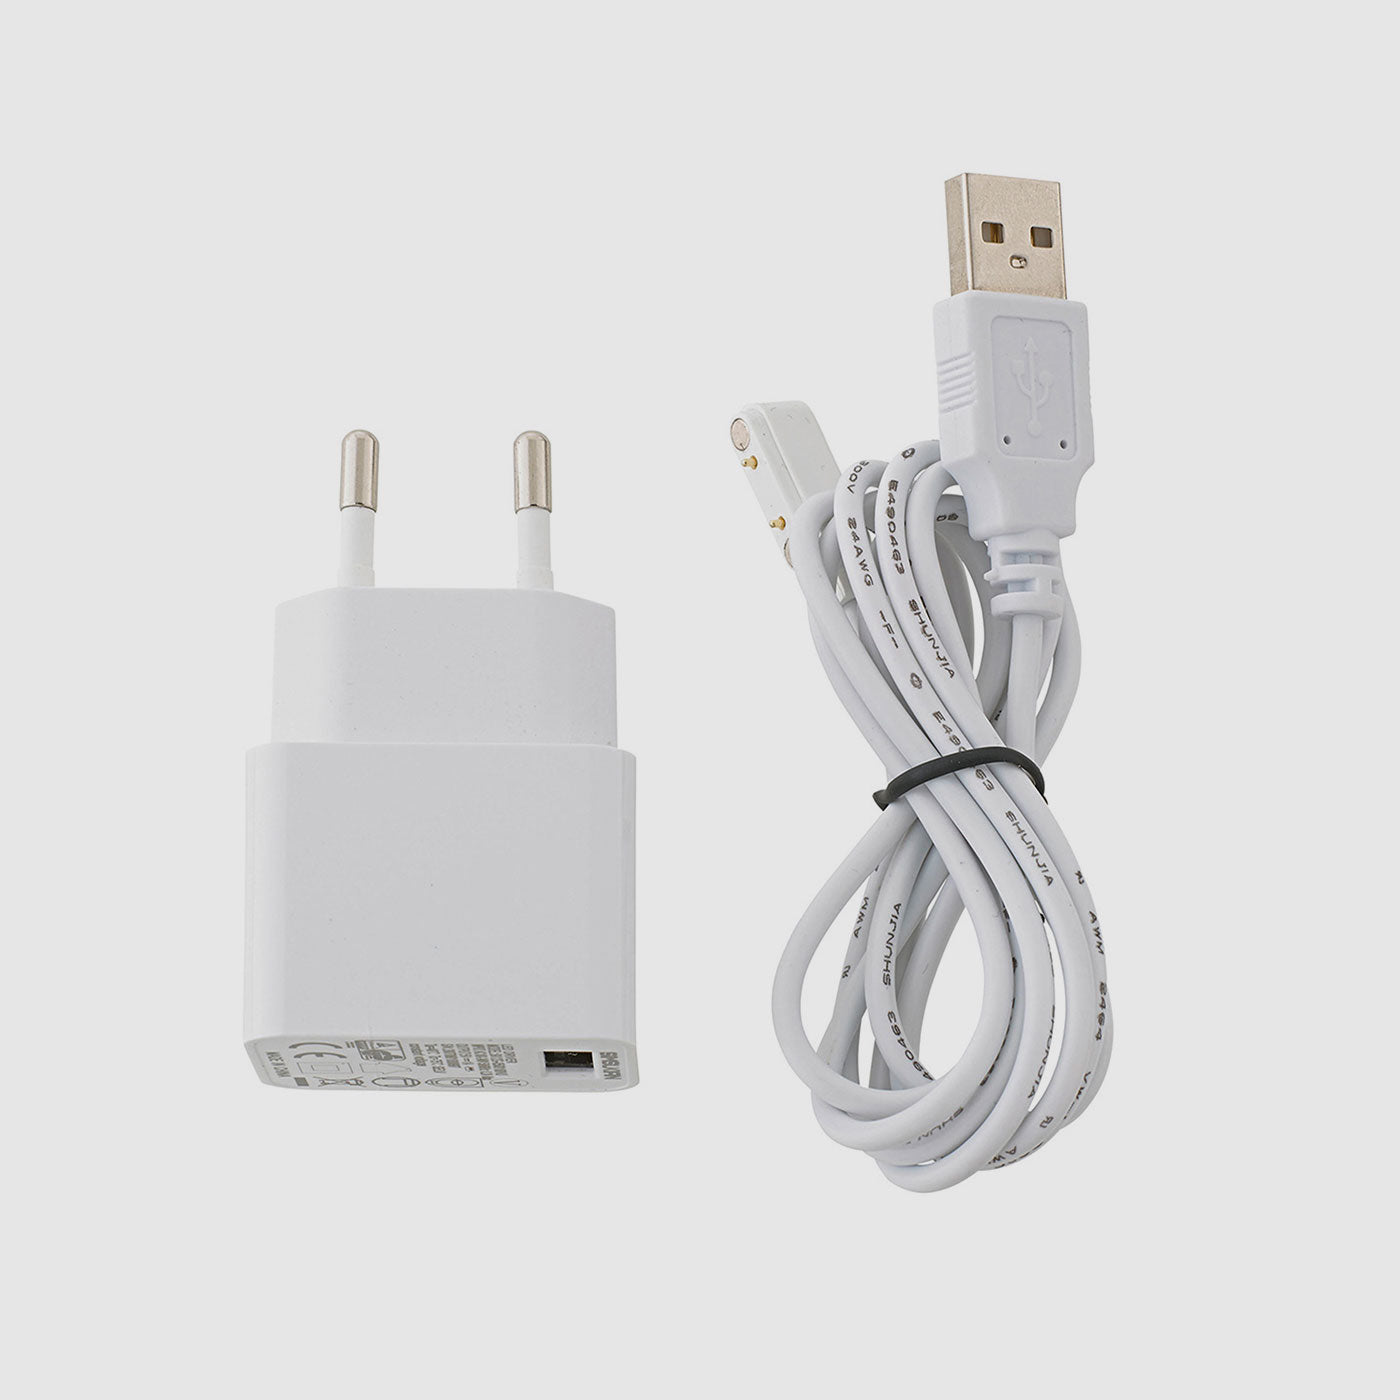 Sigor Easy-Connect Kabel in #Farbe_Weiss